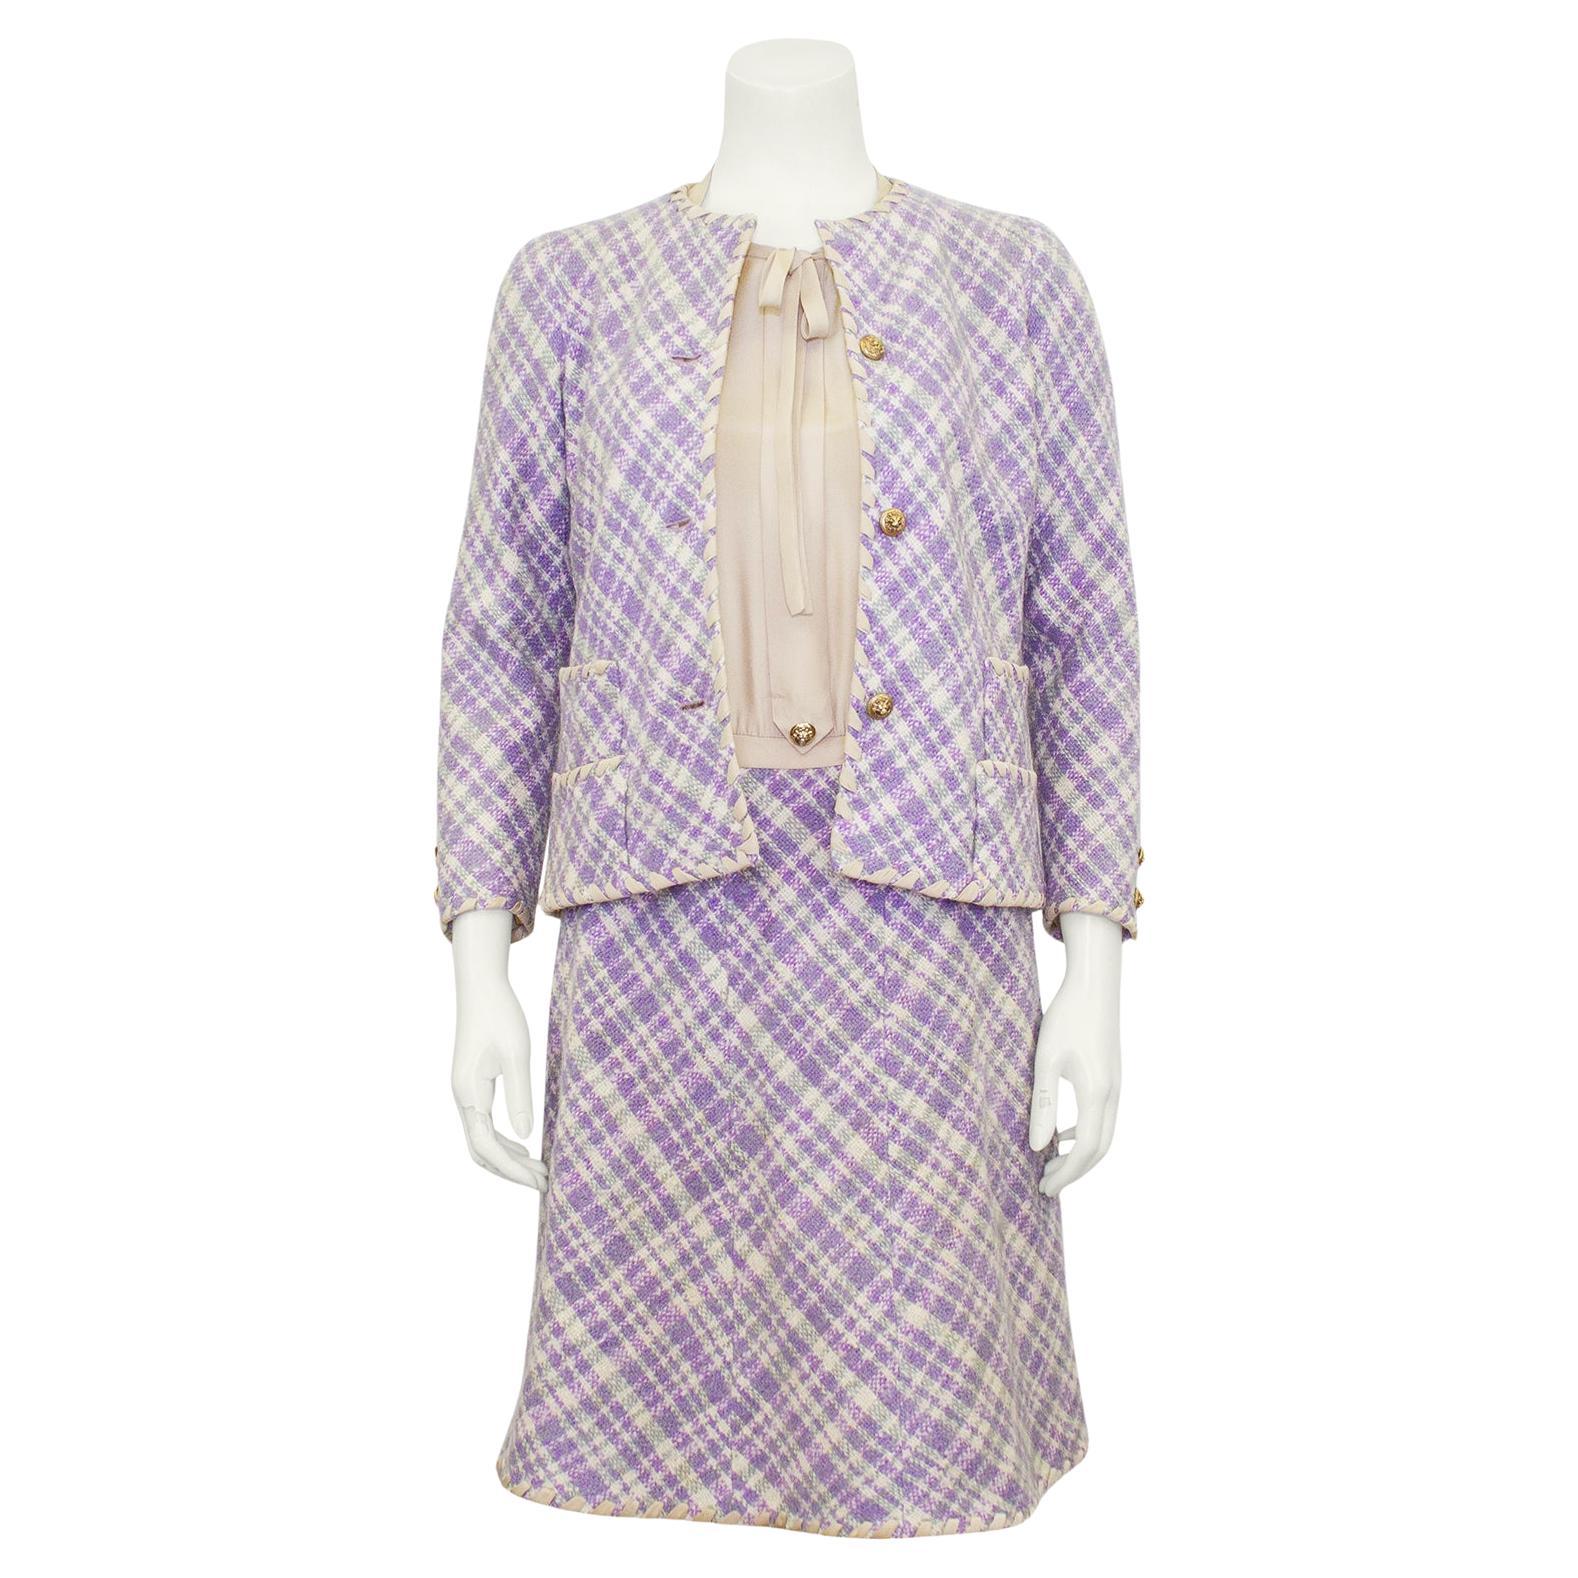 1960s Chanel Haute Couture Purple Tweed Jacket and Dress Ensemble